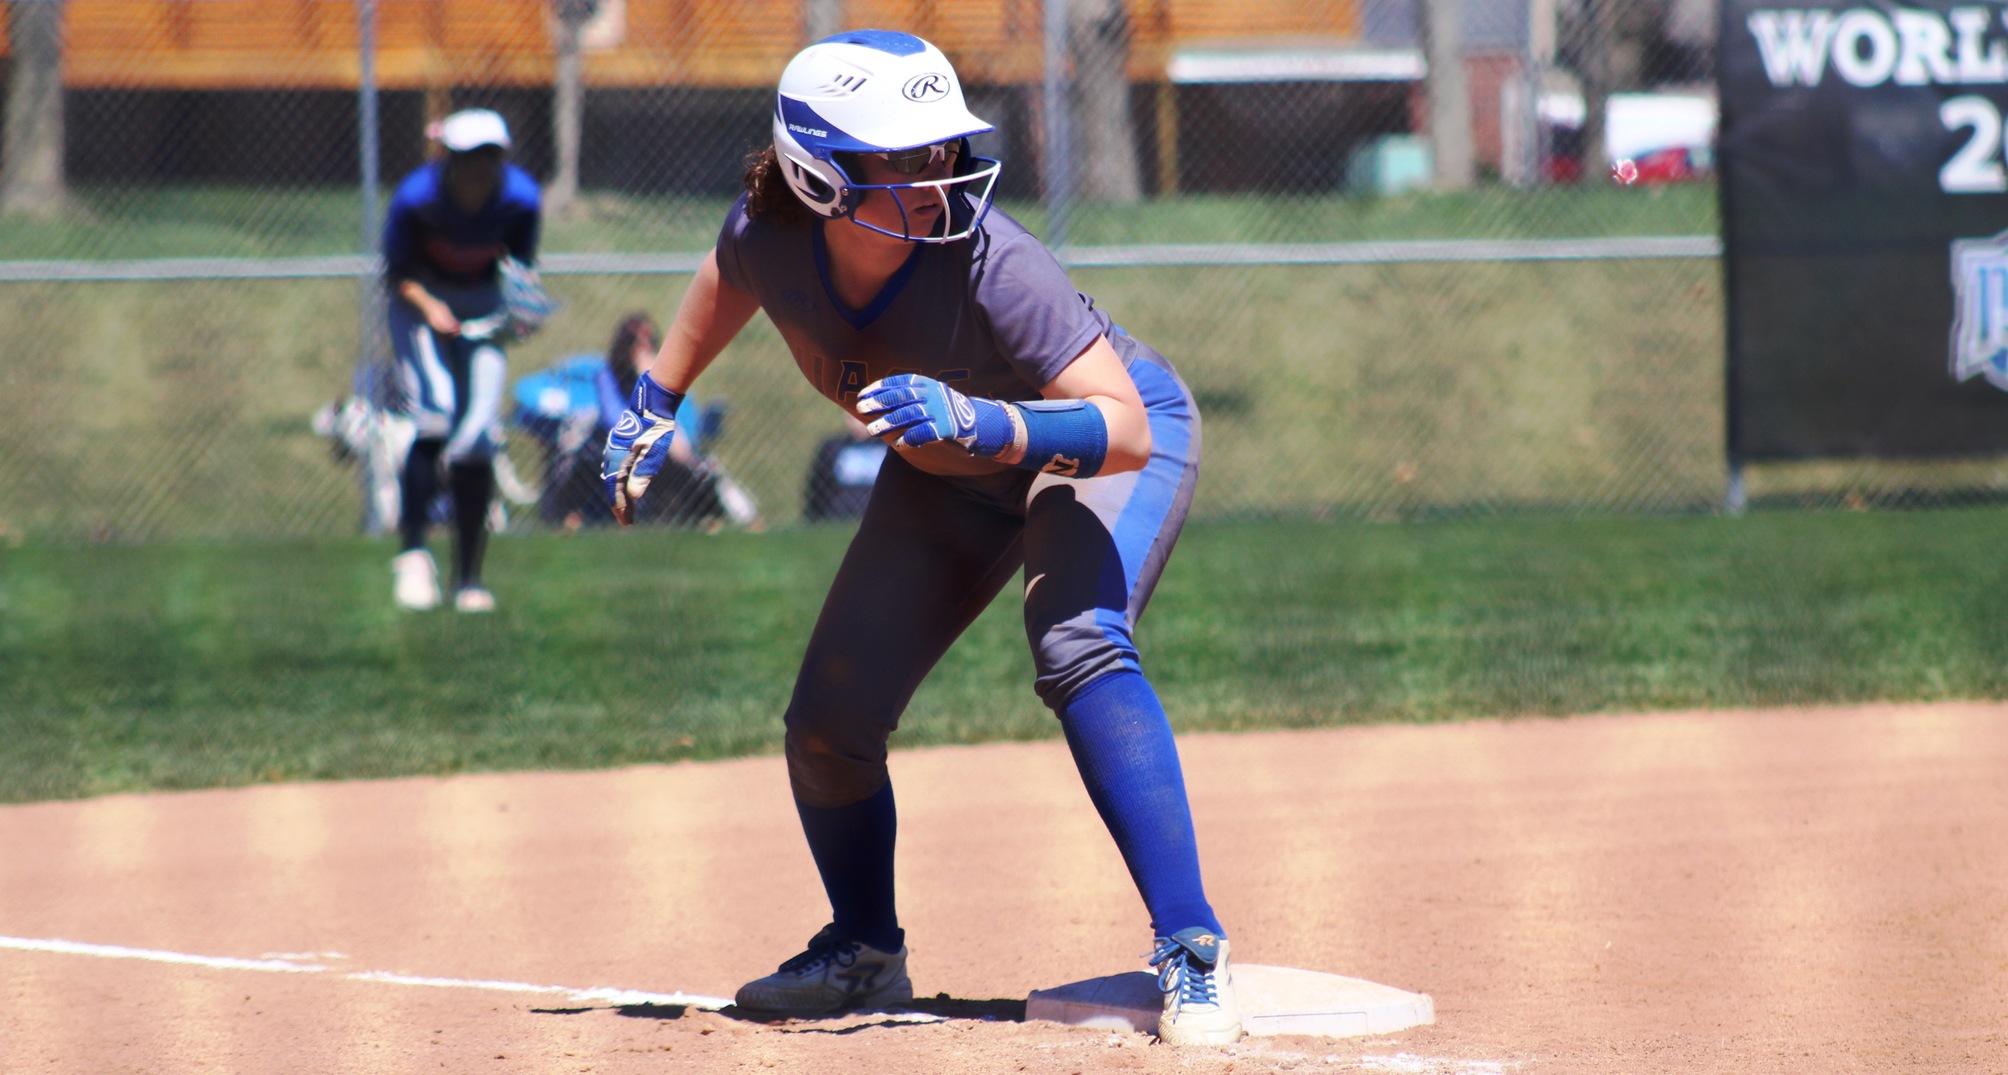 NIACC's Alyssa Laxson waits for the pitch at third base during a game earlier this season against DMACC in Boone.